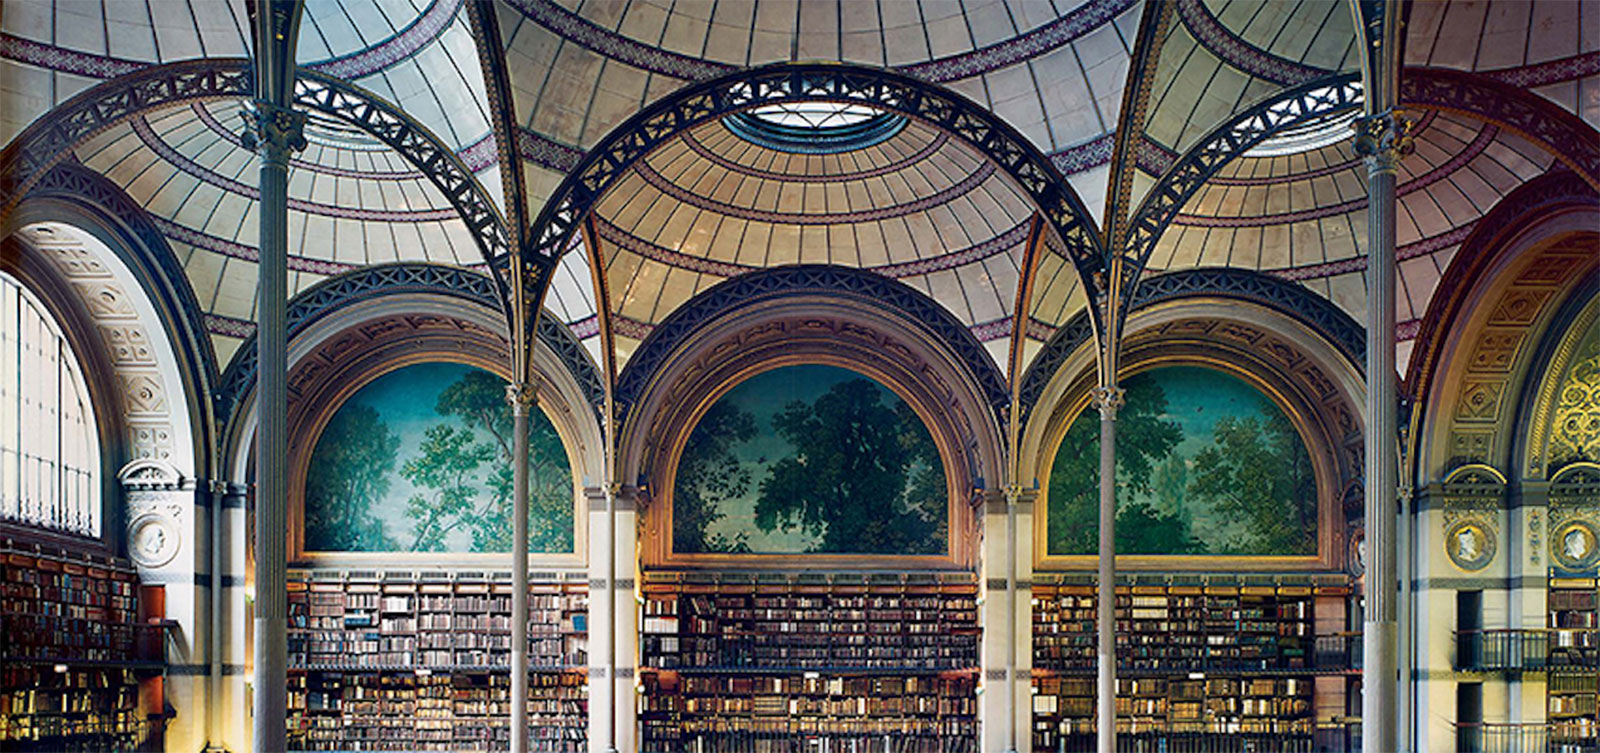 The Reading Room of the Bibliothèque Nationale de France in the Rue de Richelieu in Paris, designed by Henri Labrouste, and built between 1862 and 1868.